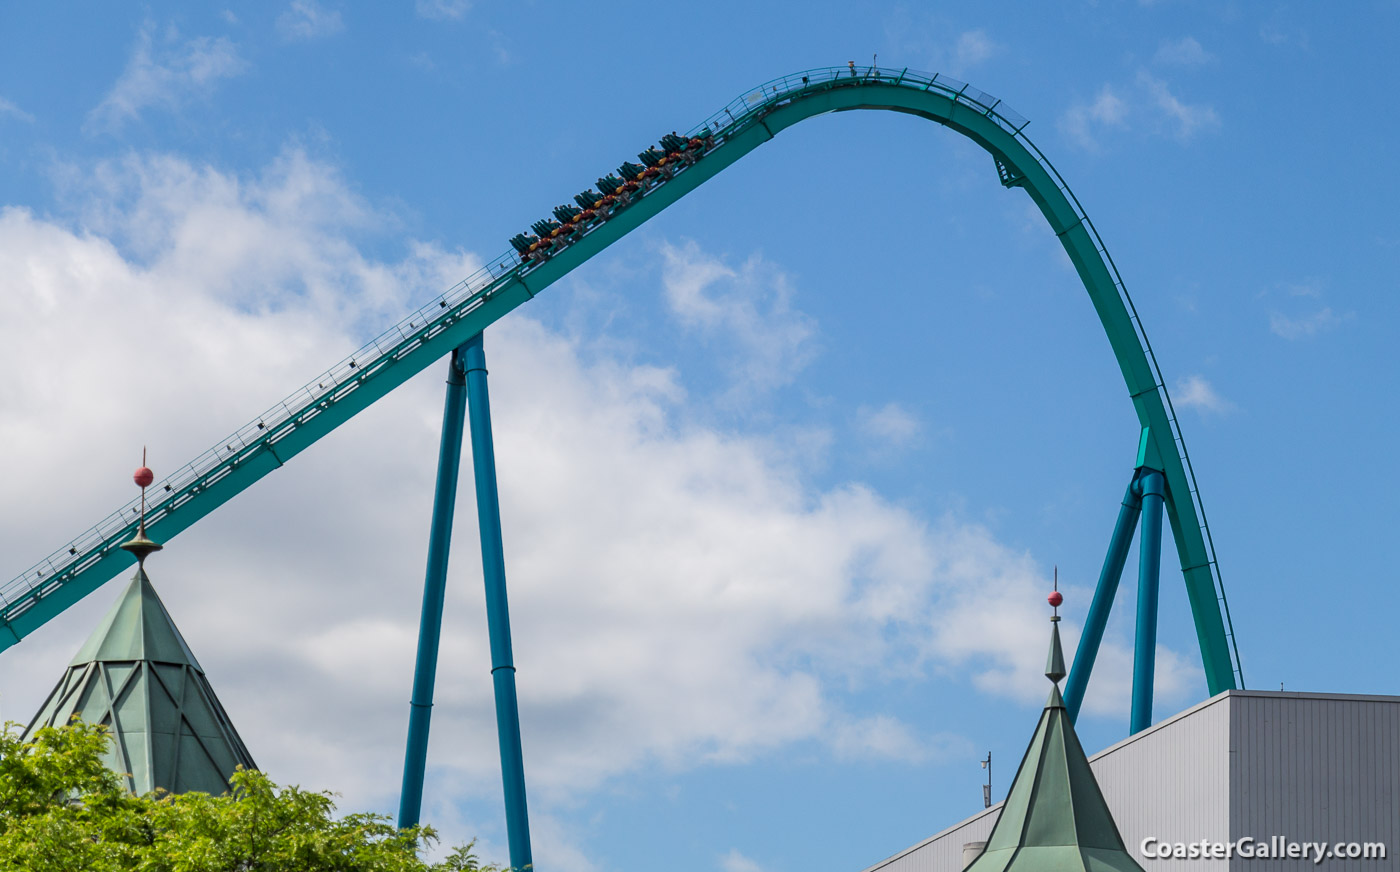 Leviathan is the Tallest Canadian Roller Coaster